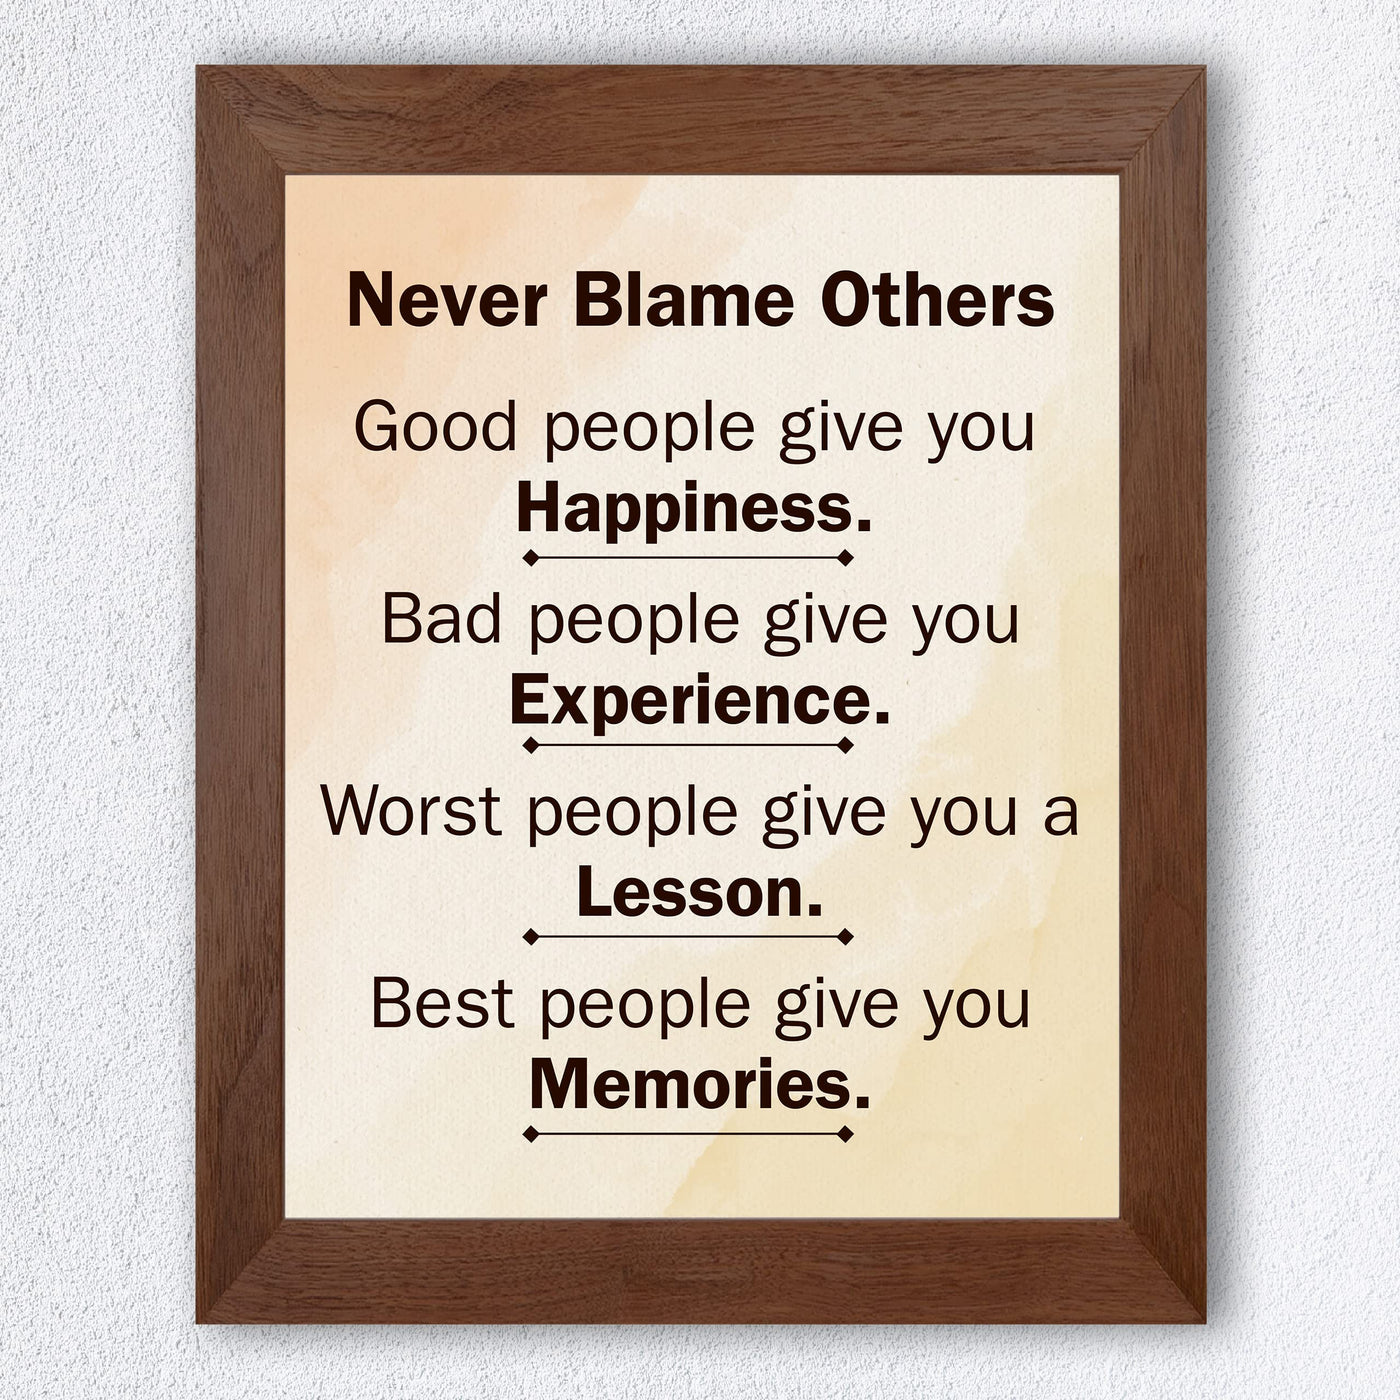 Never Blame Others- Inspirational Quotes Wall Art Sign-8 x 10" Vintage Design Typography Print -Ready to Frame. Motivational Home-Office-Classroom-Inspiration Decor. Great Gift for Motivation!